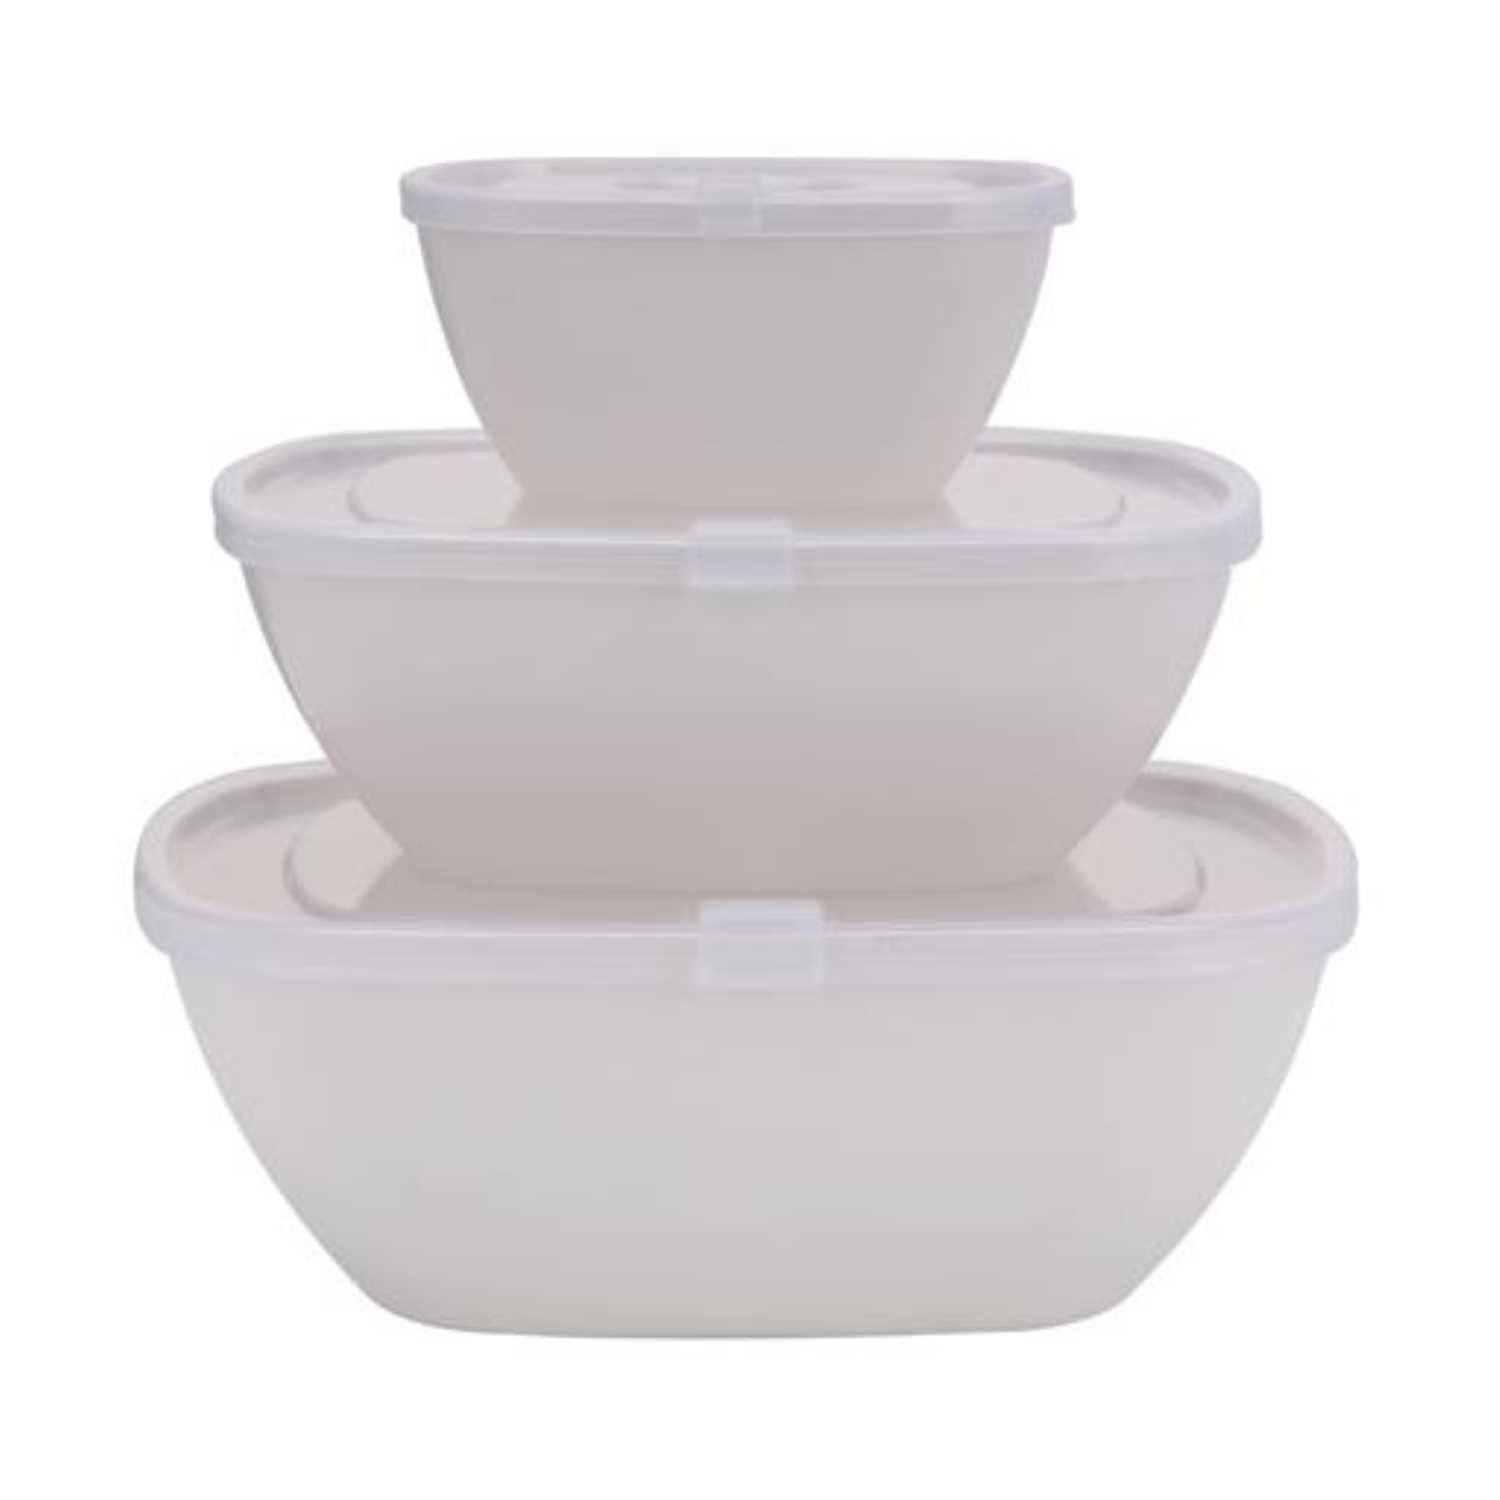 Royalford 3Pcs Bowl Set With Air-Tight Lid, Food Container, Rf11008 | Classic Prep Bowls With Lids | Food Storage Container | Versatile Bowls For Kitchen, Microwave Safe